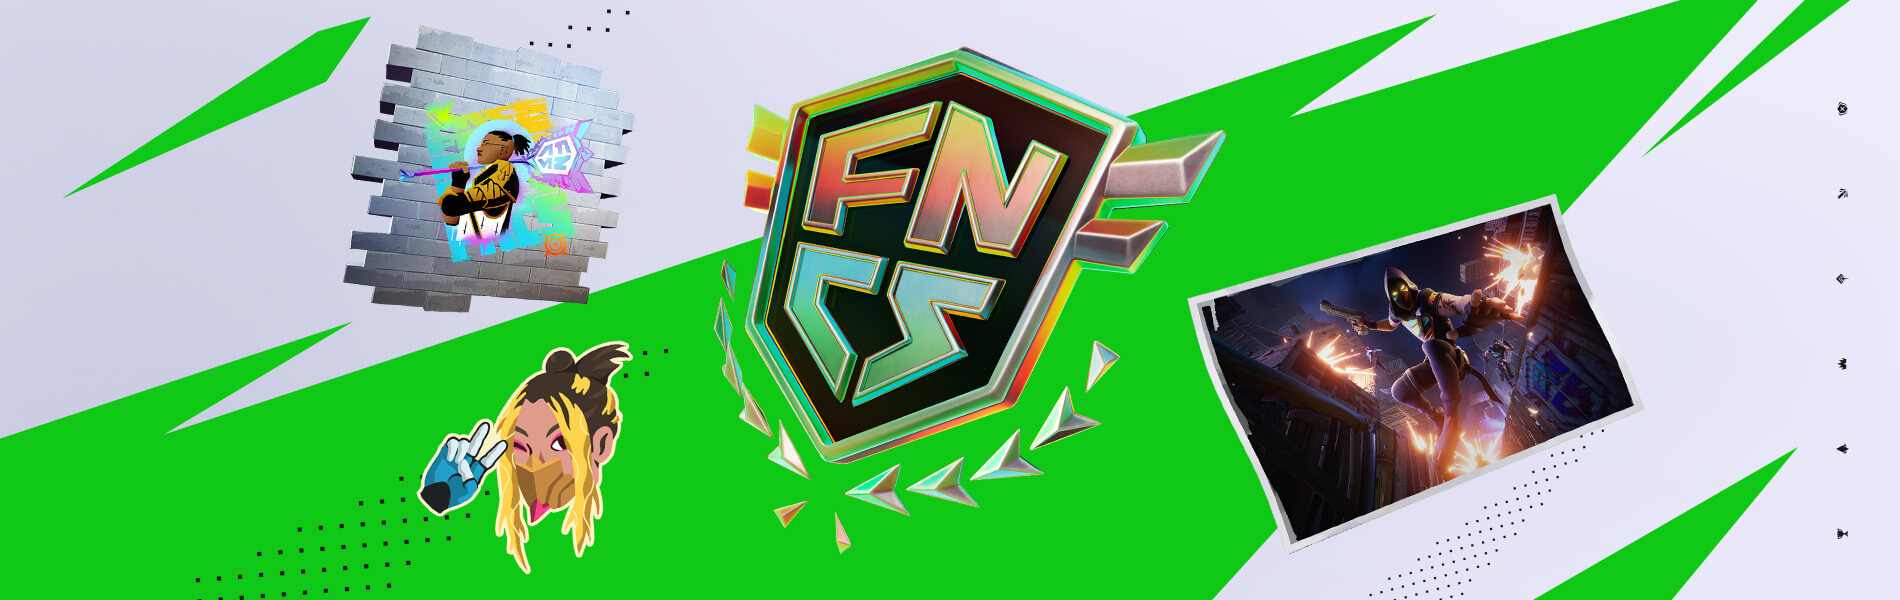 Fortnite reveals new Drops for FNCS, available July 10